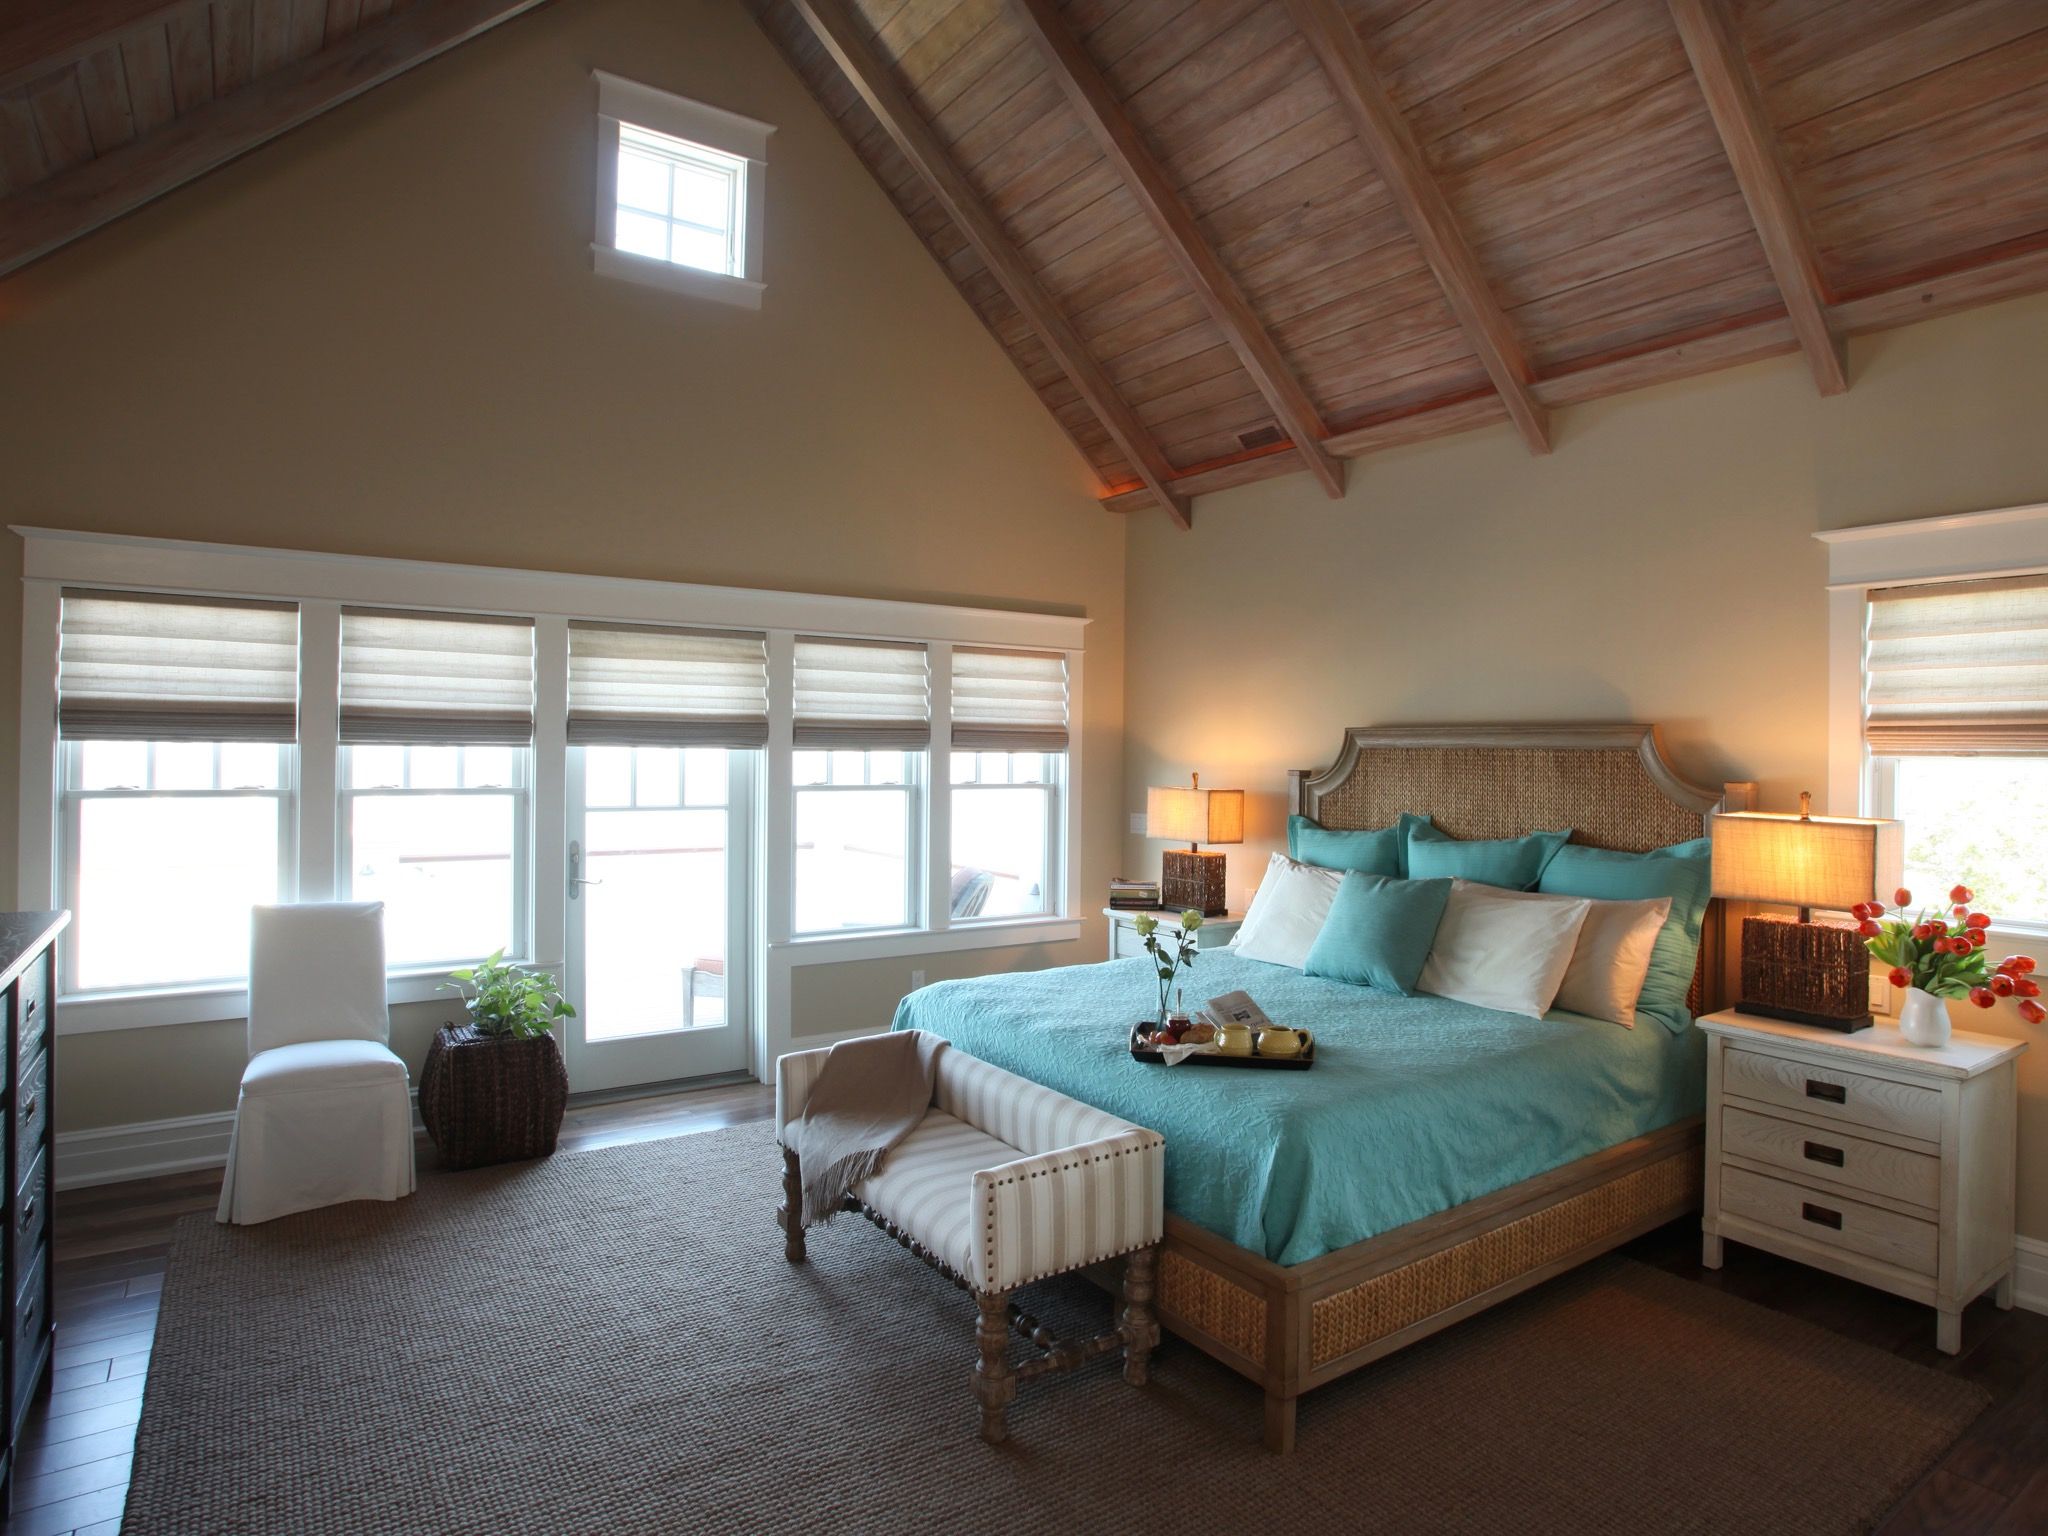 Vaulted Ceiling Expands Neutral Cottage Bedroom (View 30 of 32)